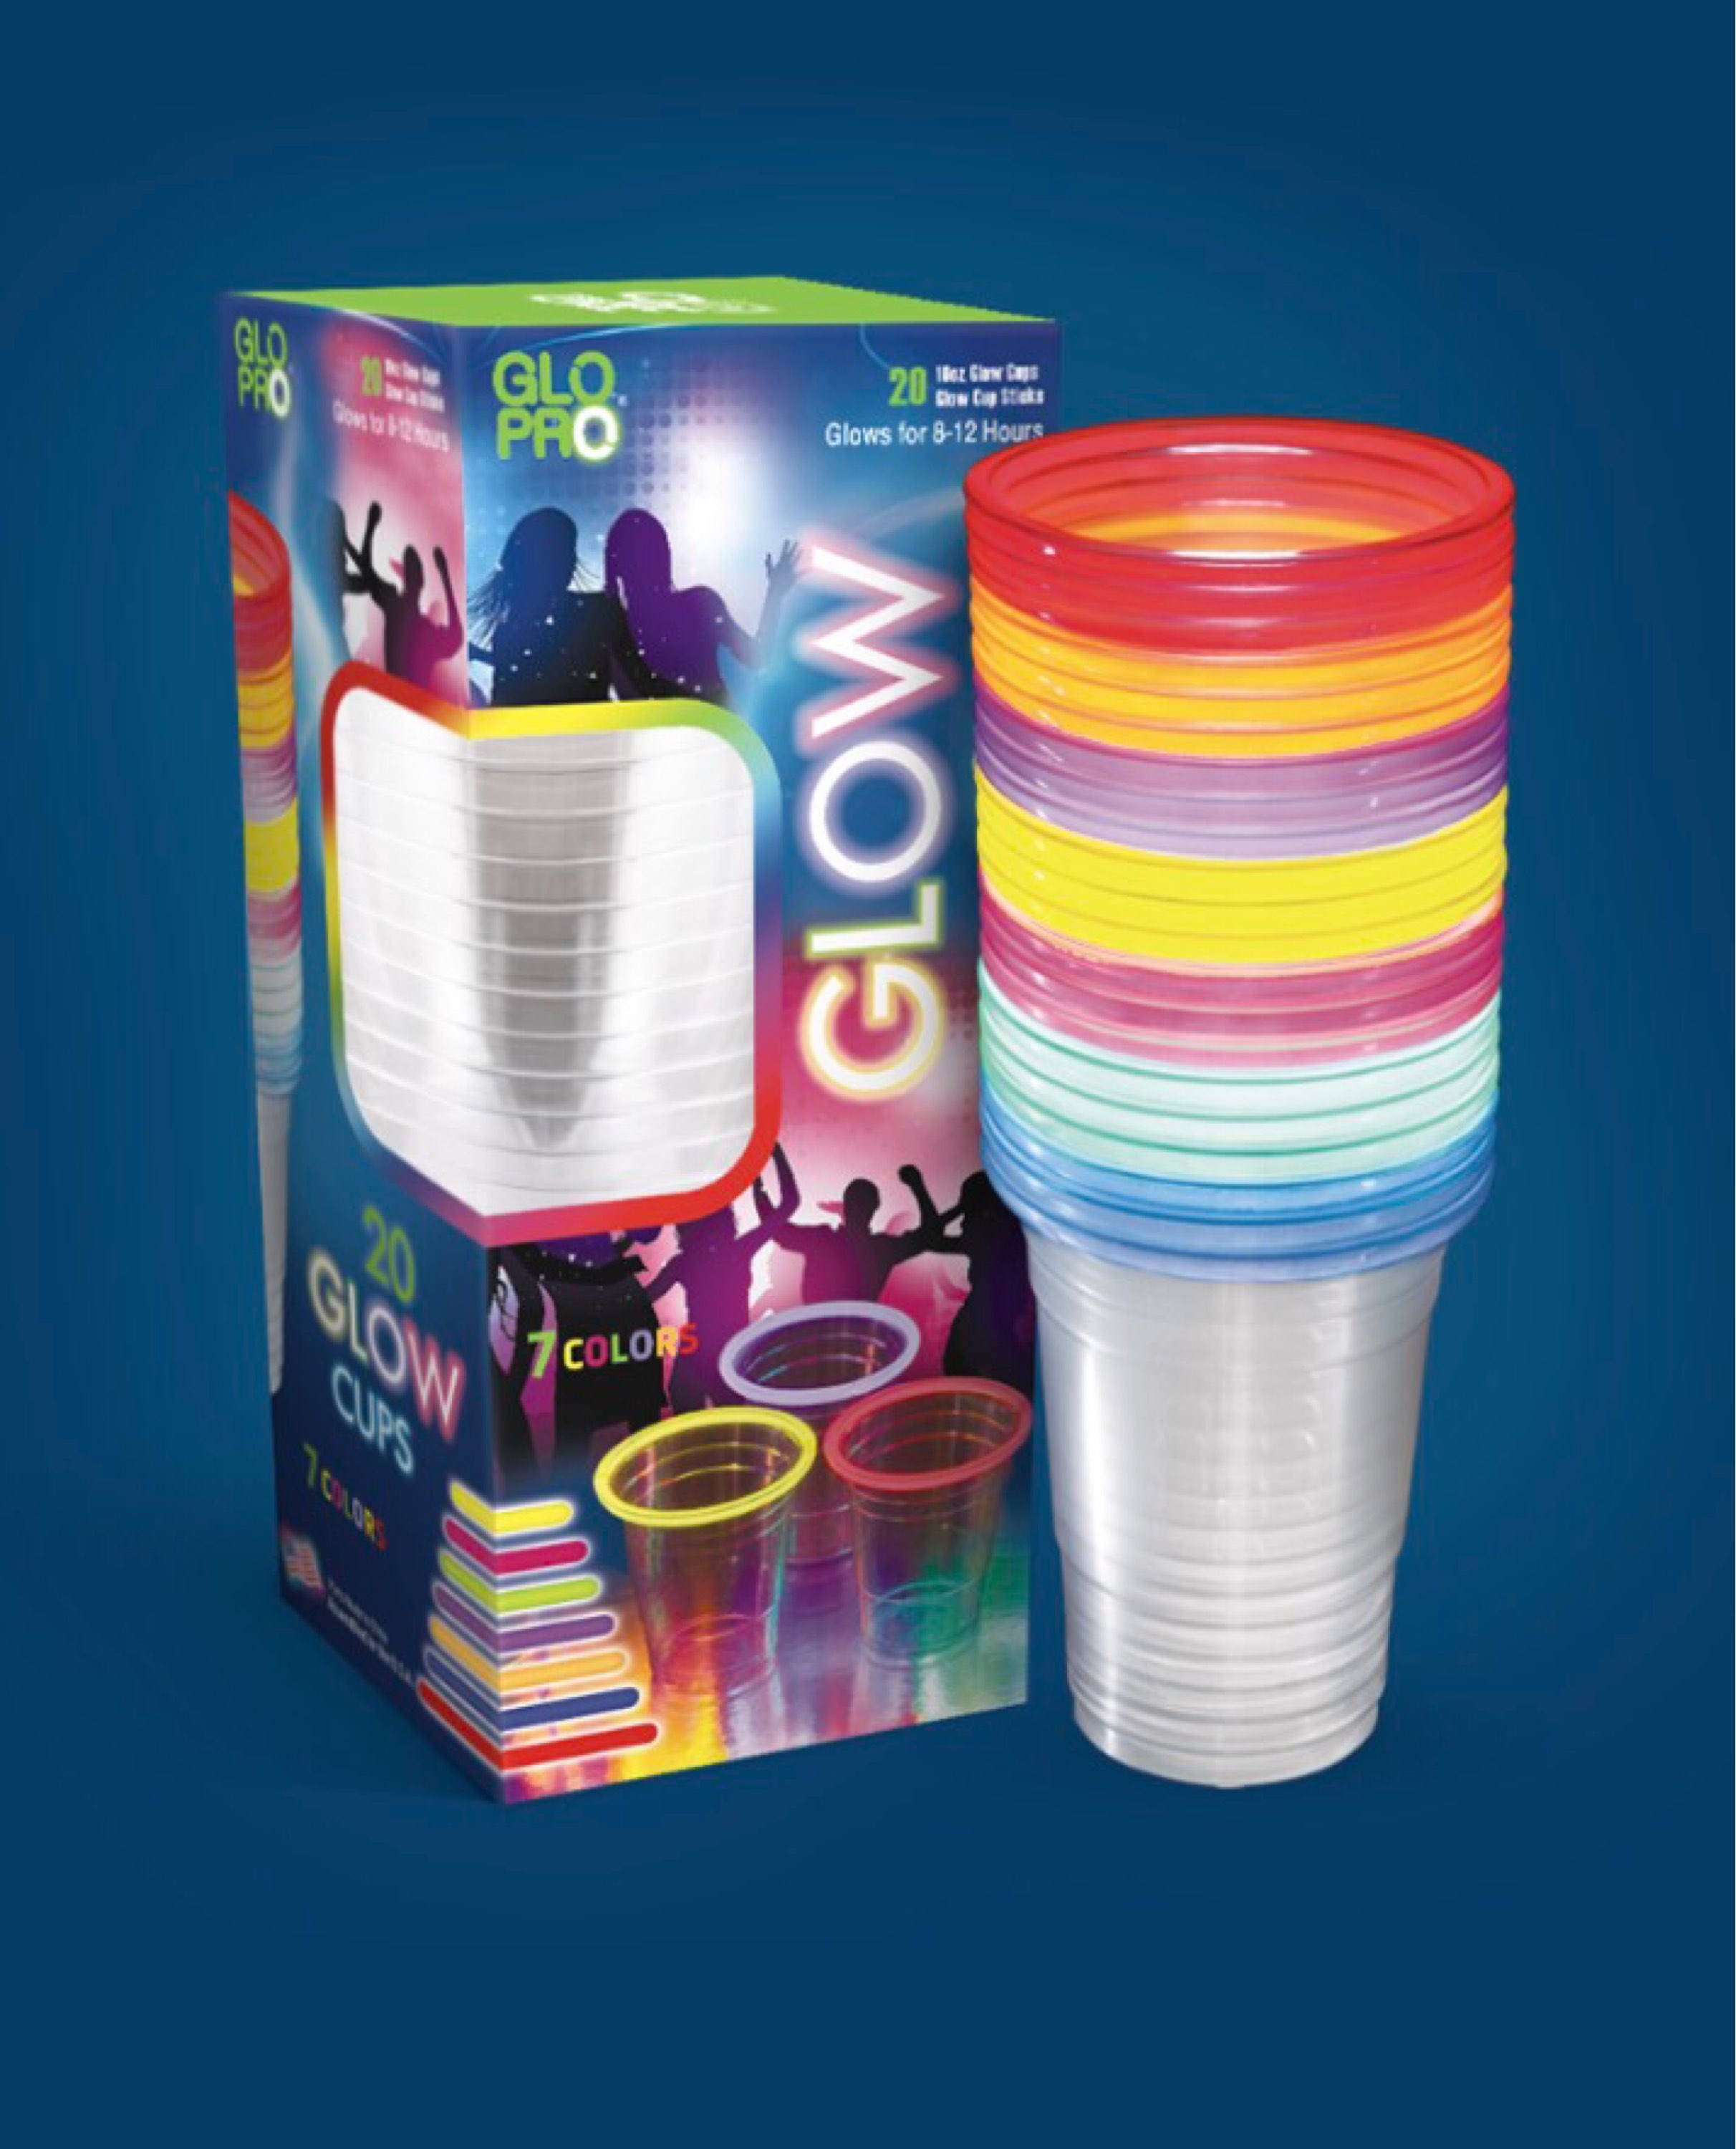 Glo Pro Glow Party 20 Count 16oz Multicolor Light up Party Cups. 